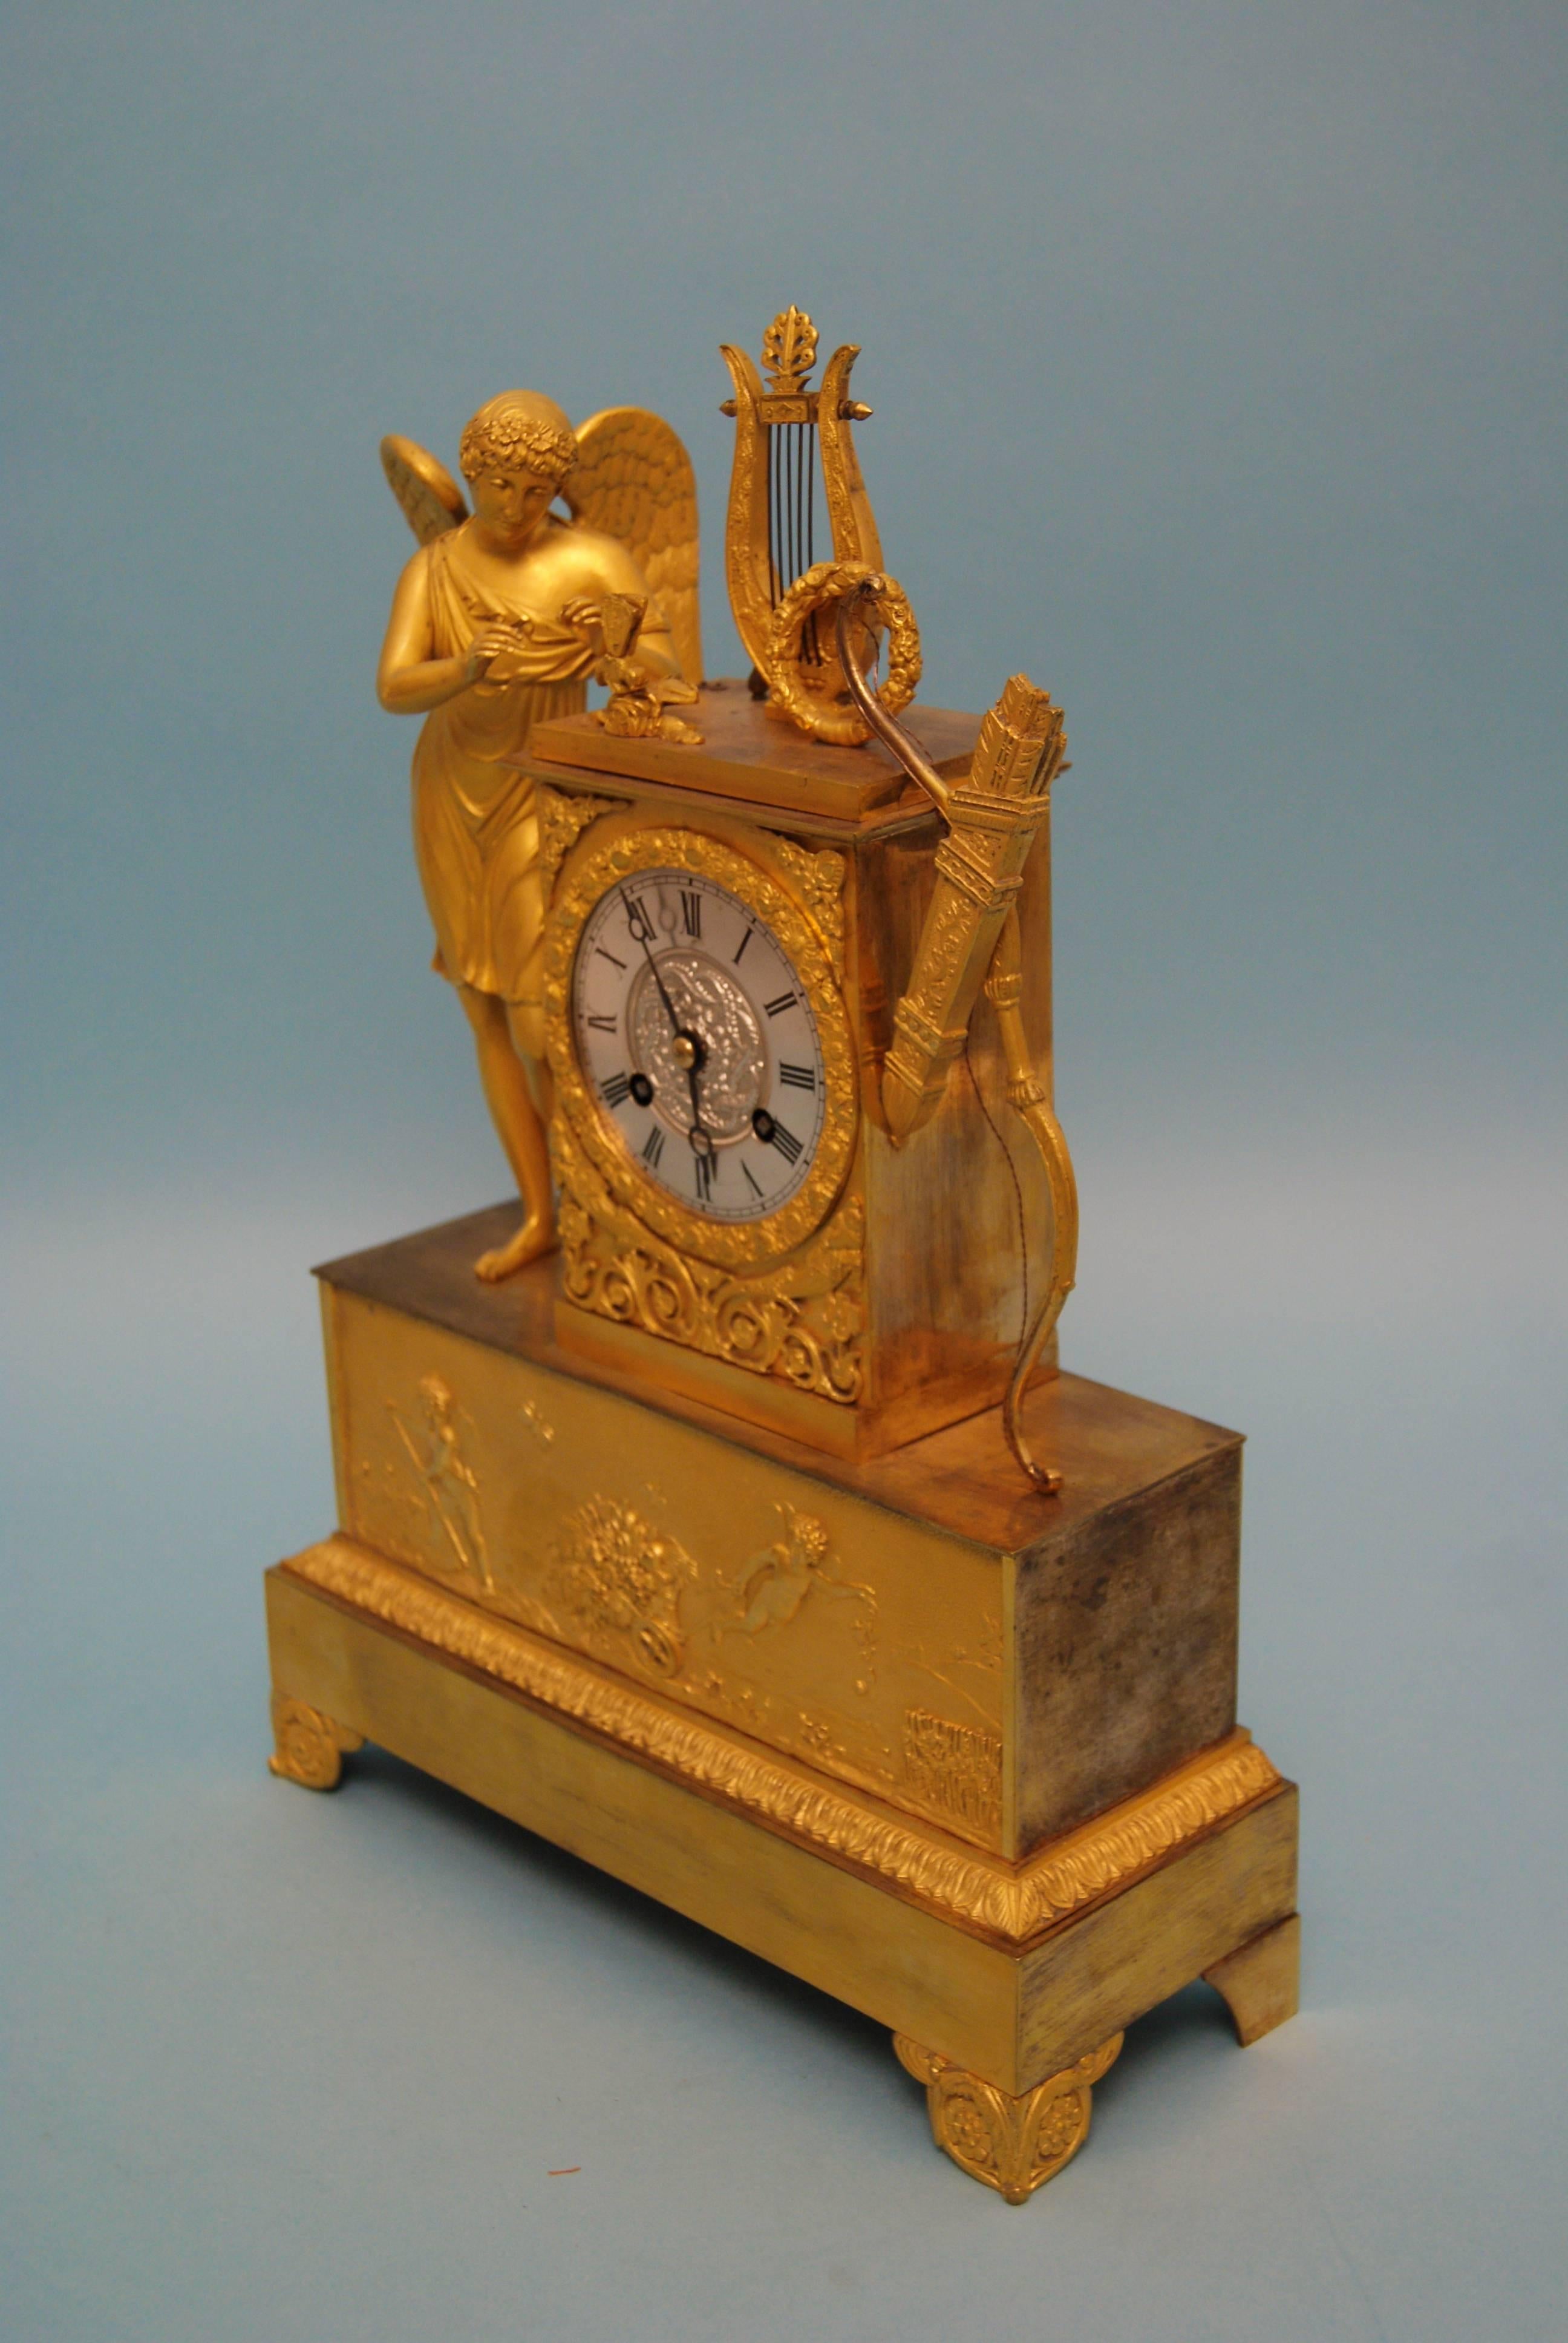 Subject:
French gorgeous mantel / mantle / table ormolu clock, main parts made of parcel-gilt bronze. - Explanation: Mantel clocks — or shelf clocks — are house clocks traditionally placed on the shelf, or mantel, above the